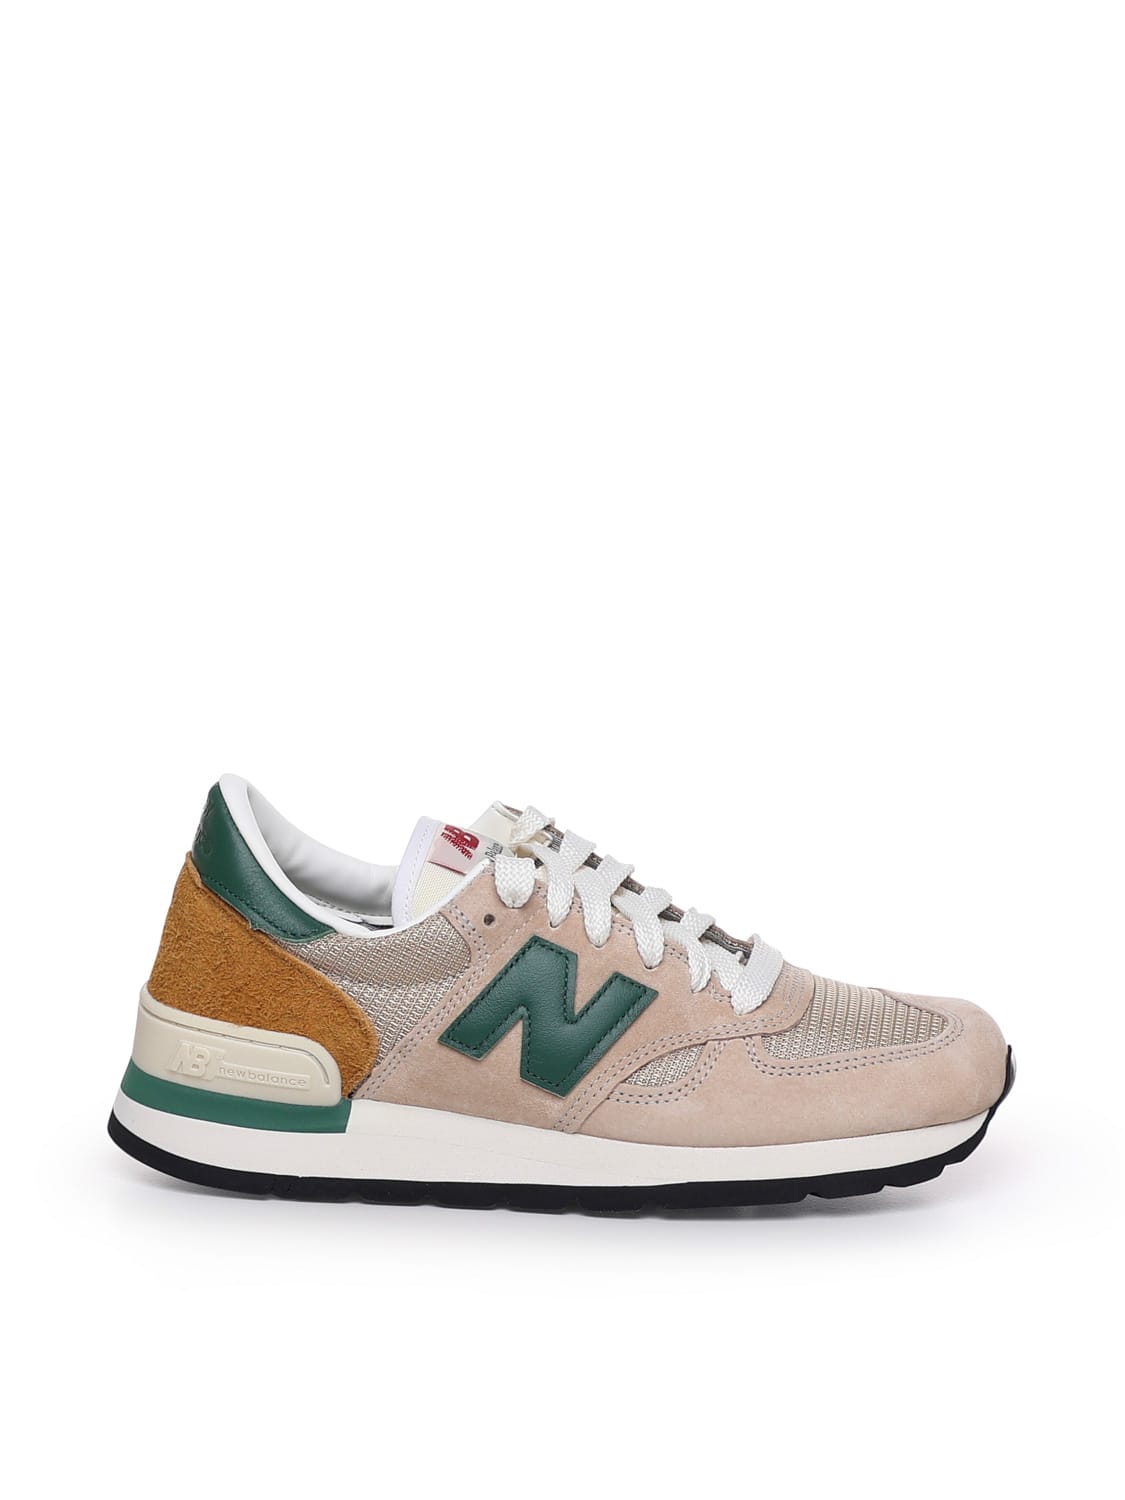 NEW BALANCE SNEAKERS 990